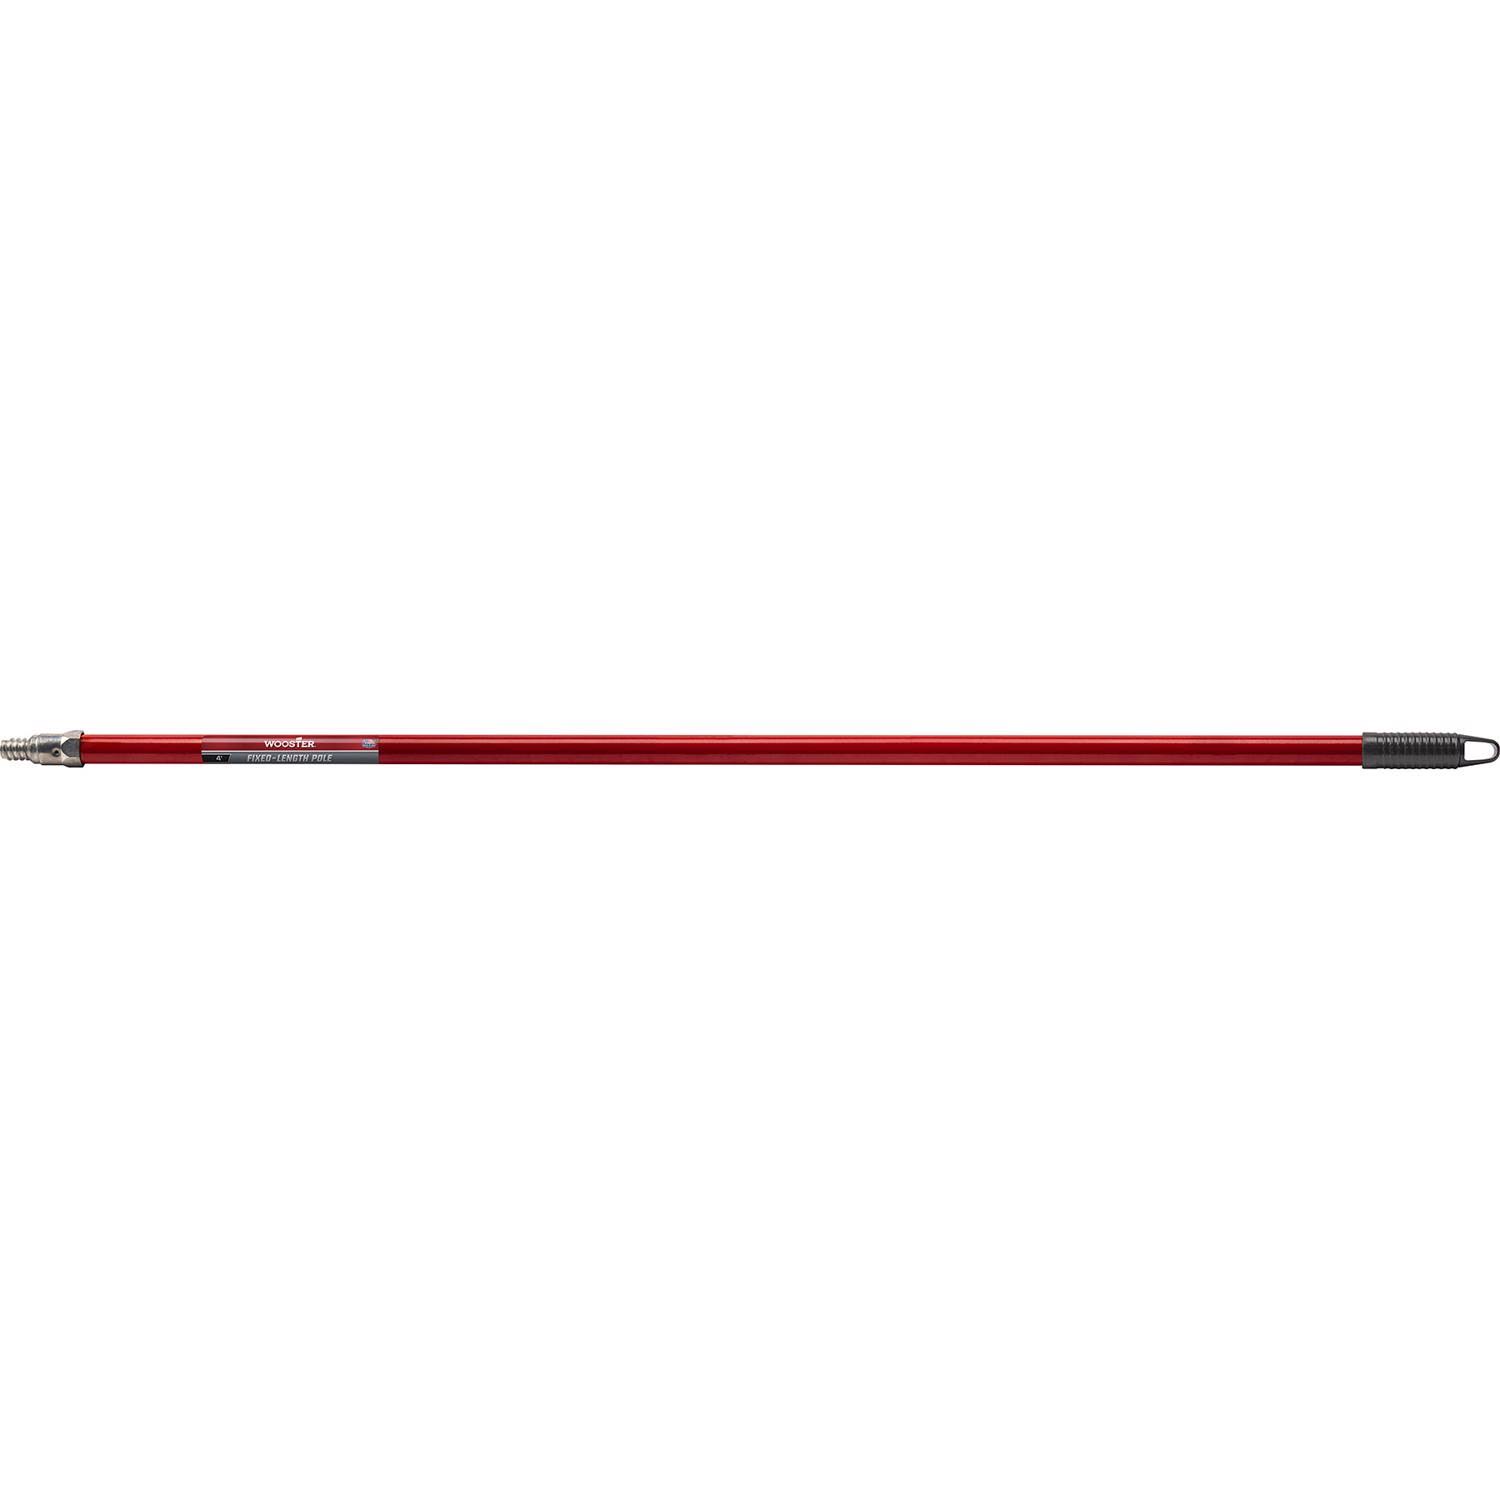 Wooster R070-48 4' Fixed-Length Pole